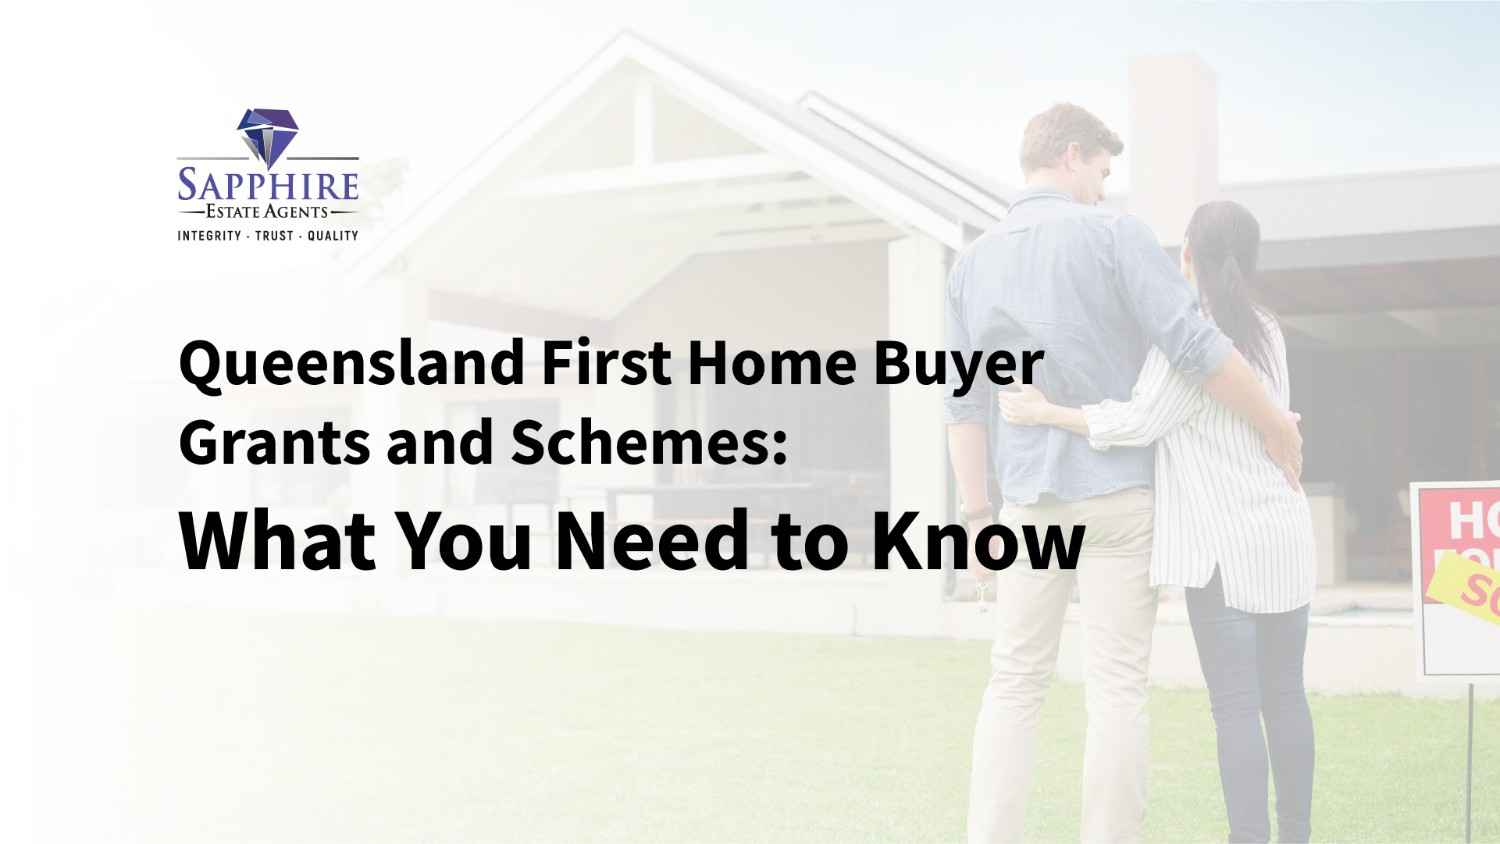 Queensland First Home Buyer Grants and Schemes